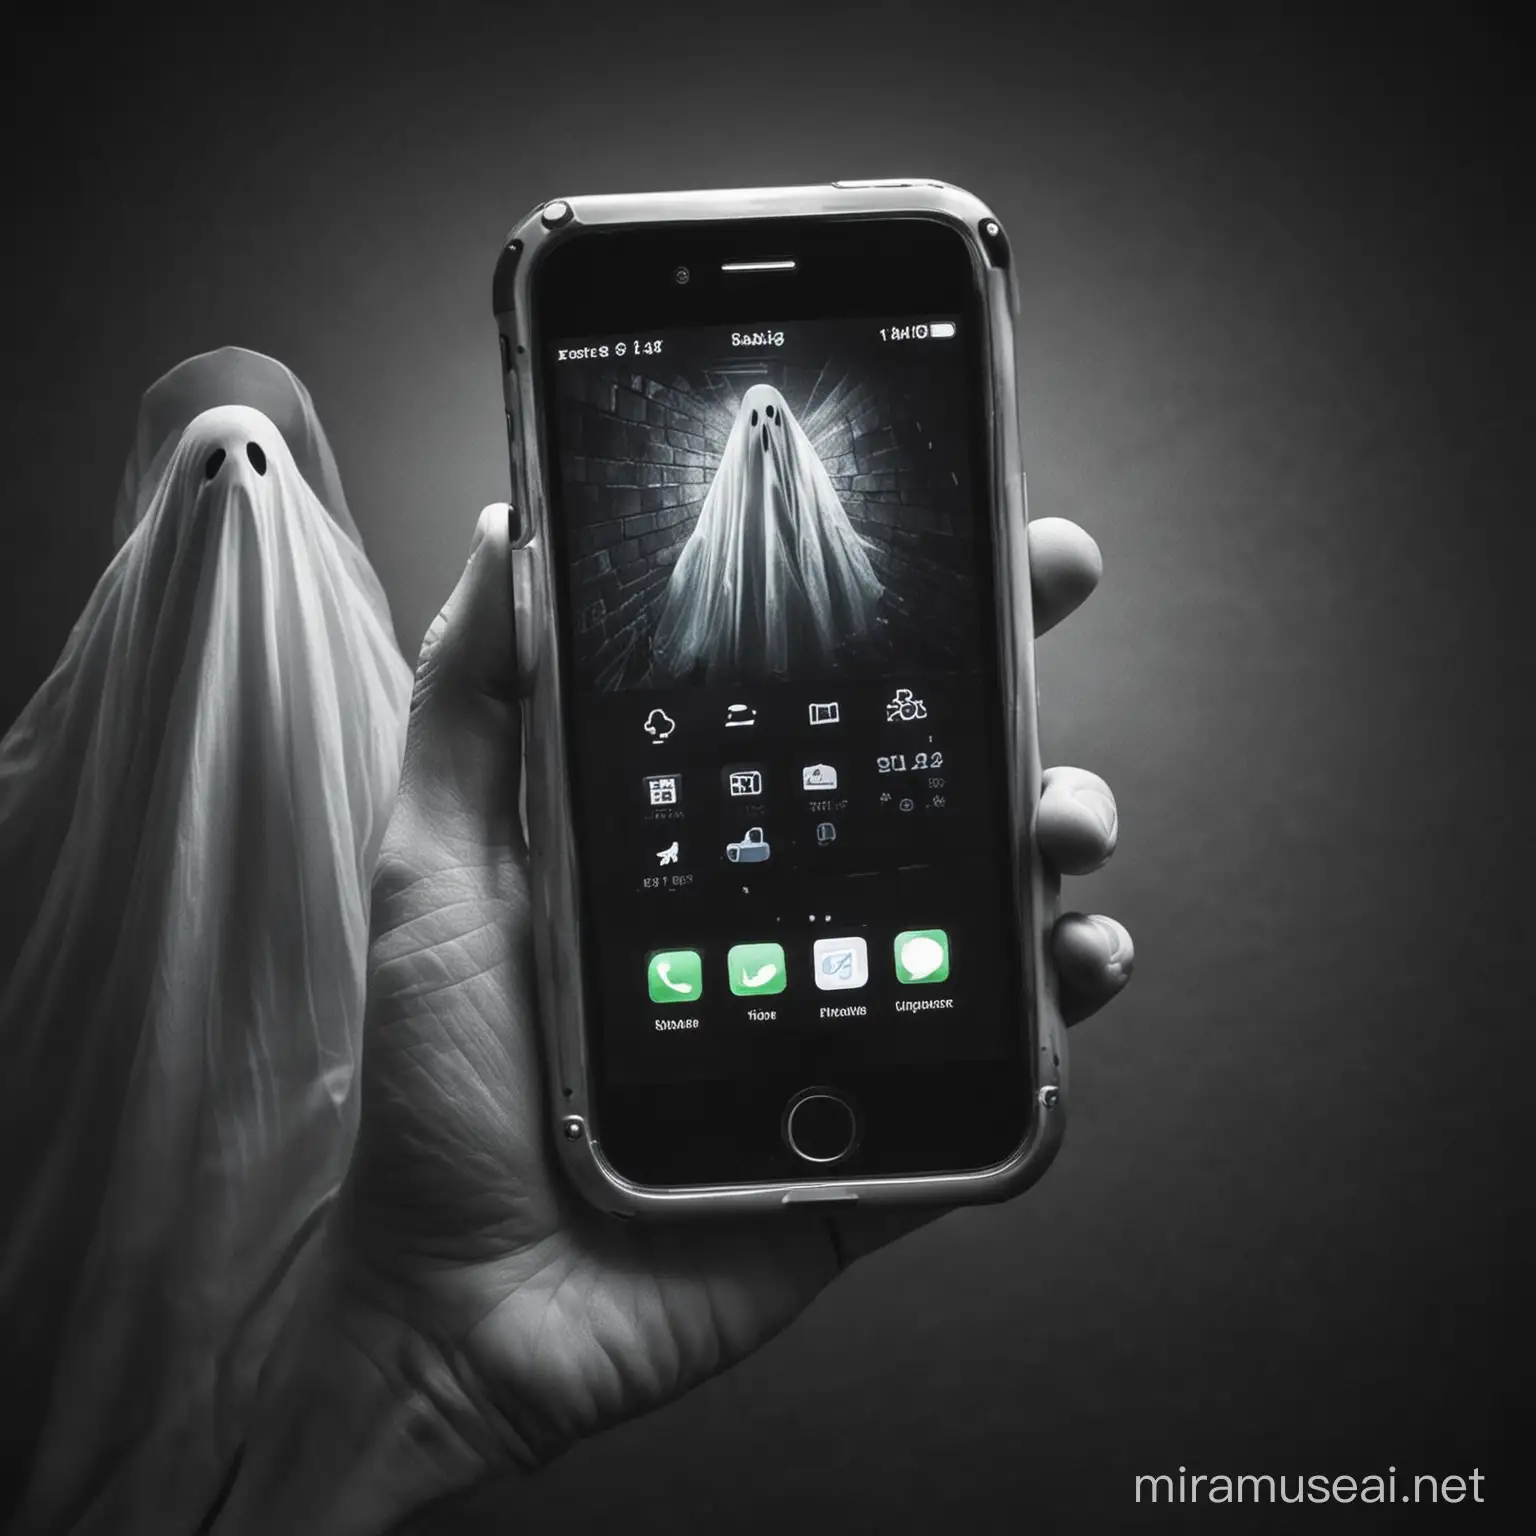 iphone with ghost hunting capabilities